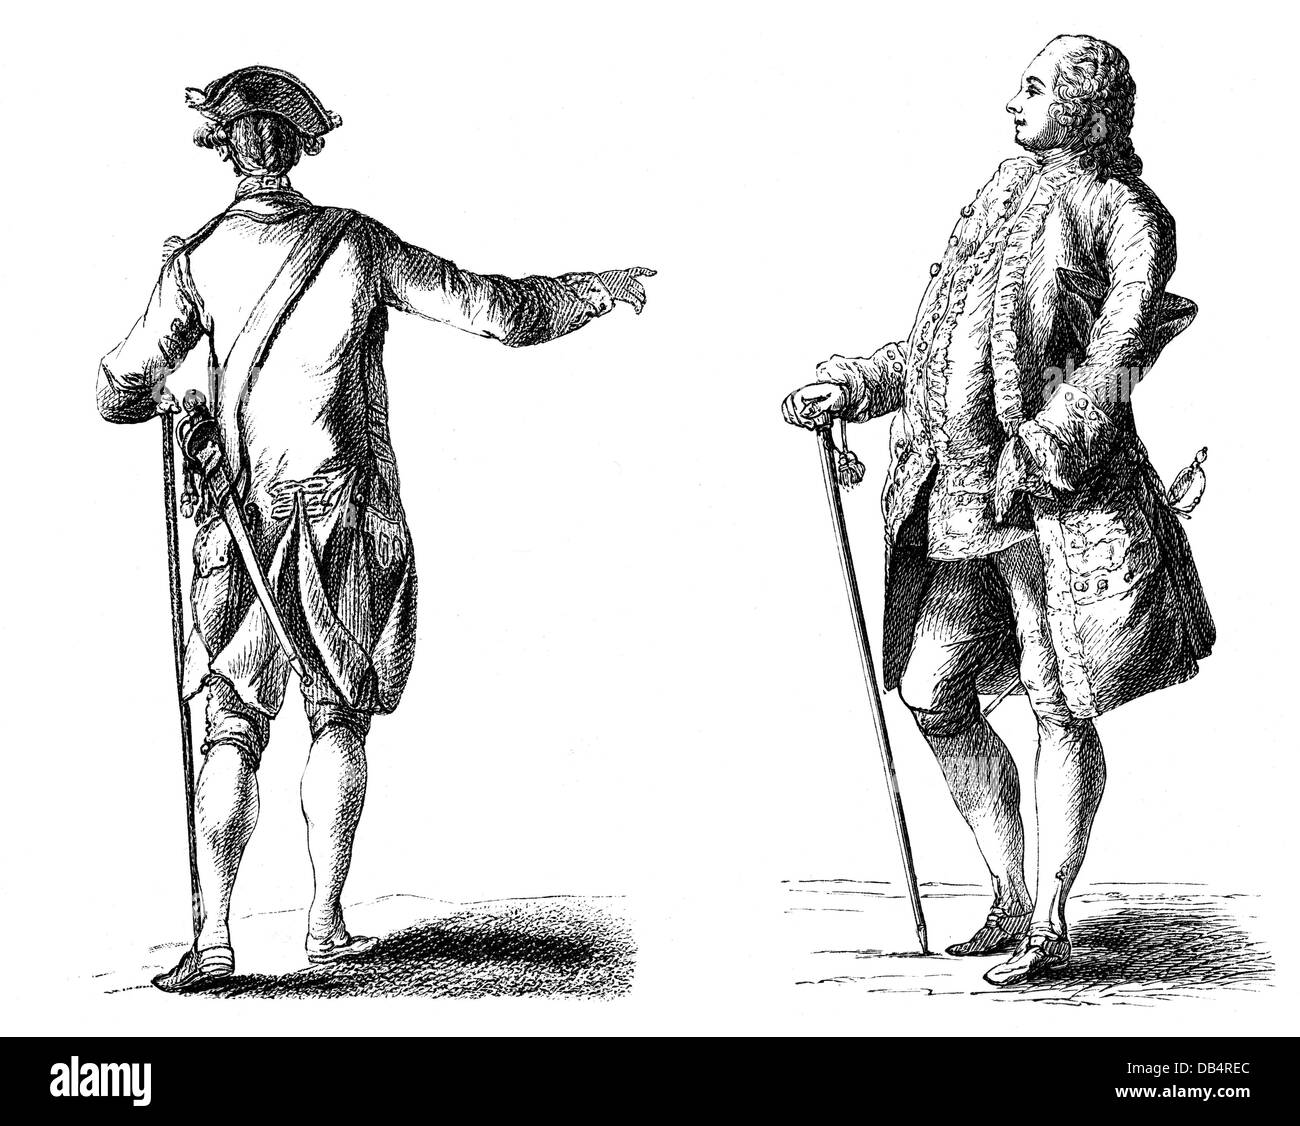 military, France, soldiers, left: common soldier, right: officer (major), mid 18th century, after Leclercq, wood engraving, 19th century, uniform, uniforms, baroque, army, armies, weapon, weapons, arms, sabre, sabres, fashion, hat, hats, stick, sticks, outfit, outfits, clothes, headpiece, headpieces, historic, historical, people, Additional-Rights-Clearences-Not Available Stock Photo